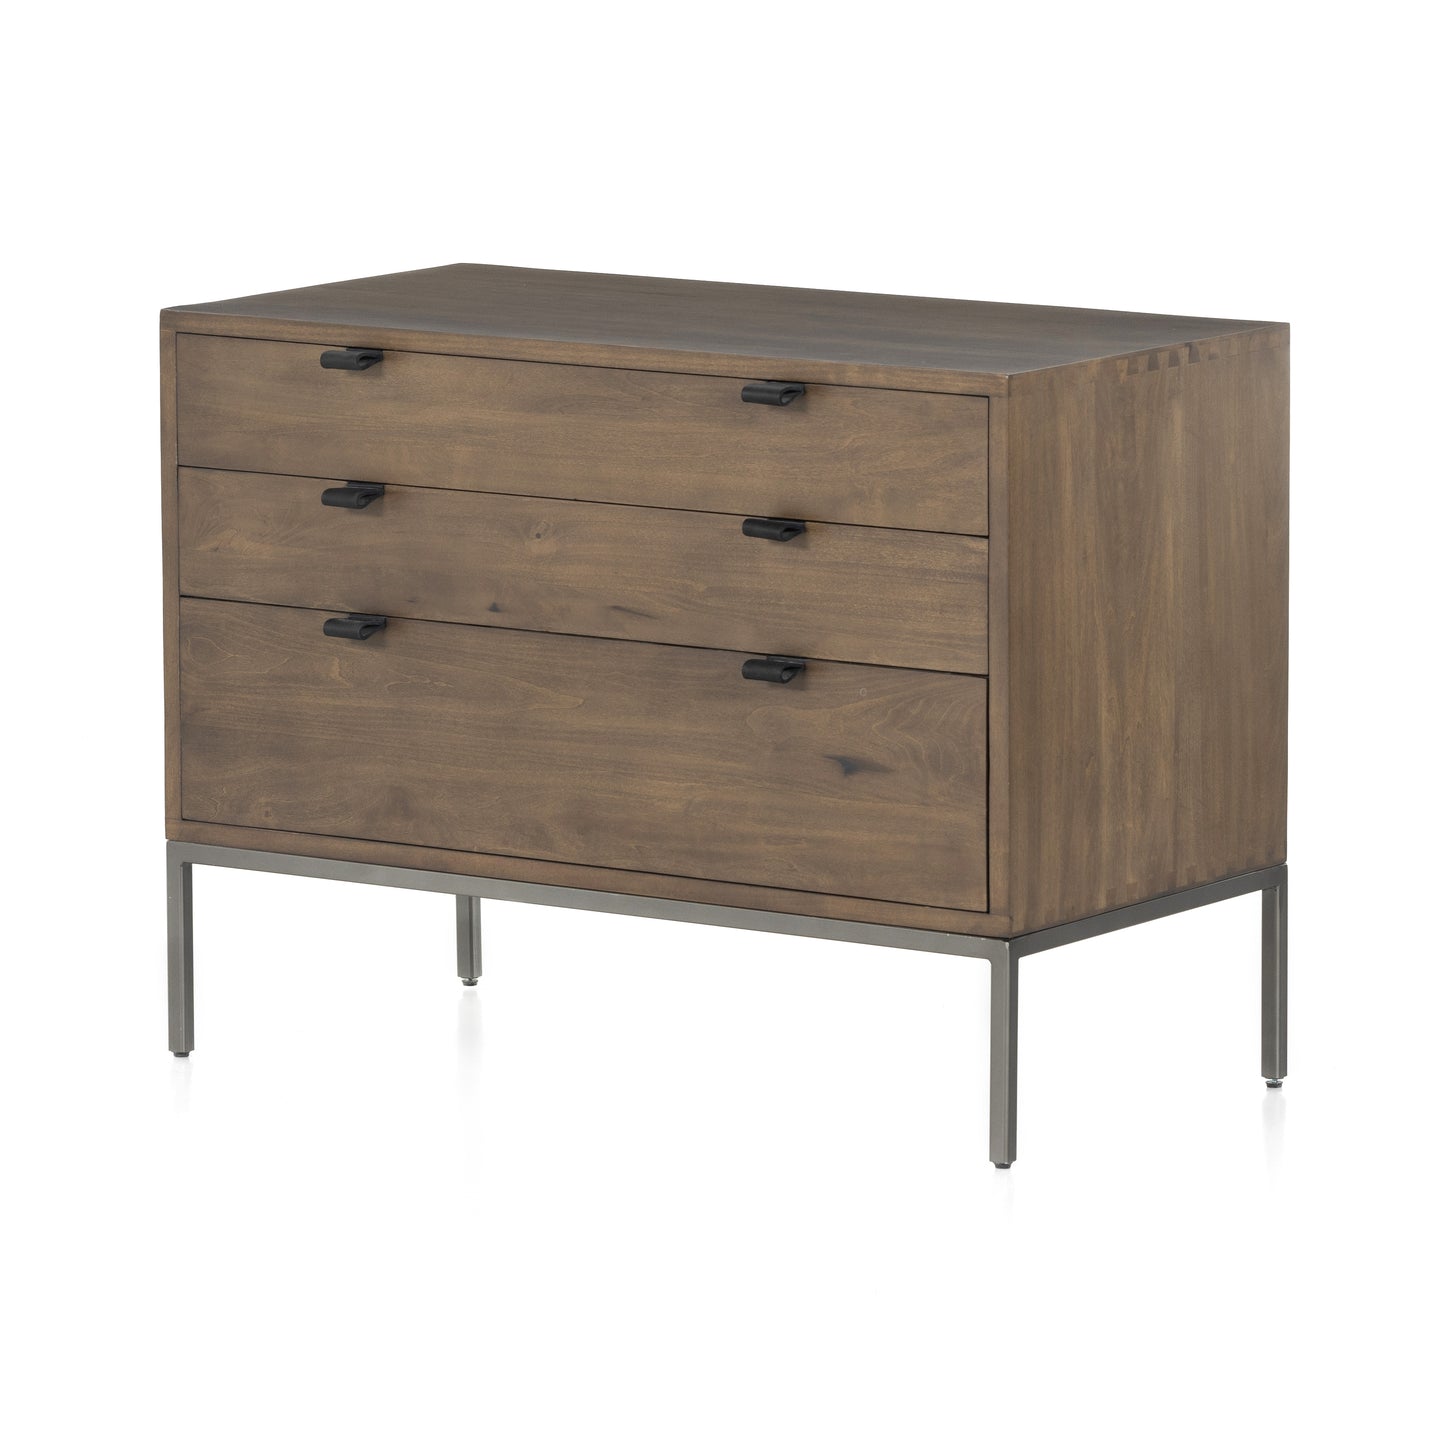 Load image into Gallery viewer, Trey Large Nighstand Nightstand Four Hands     Four Hands, Mid Century Modern Furniture, Old Bones Furniture Company, Old Bones Co, Modern Mid Century, Designer Furniture, https://www.oldbonesco.com/
